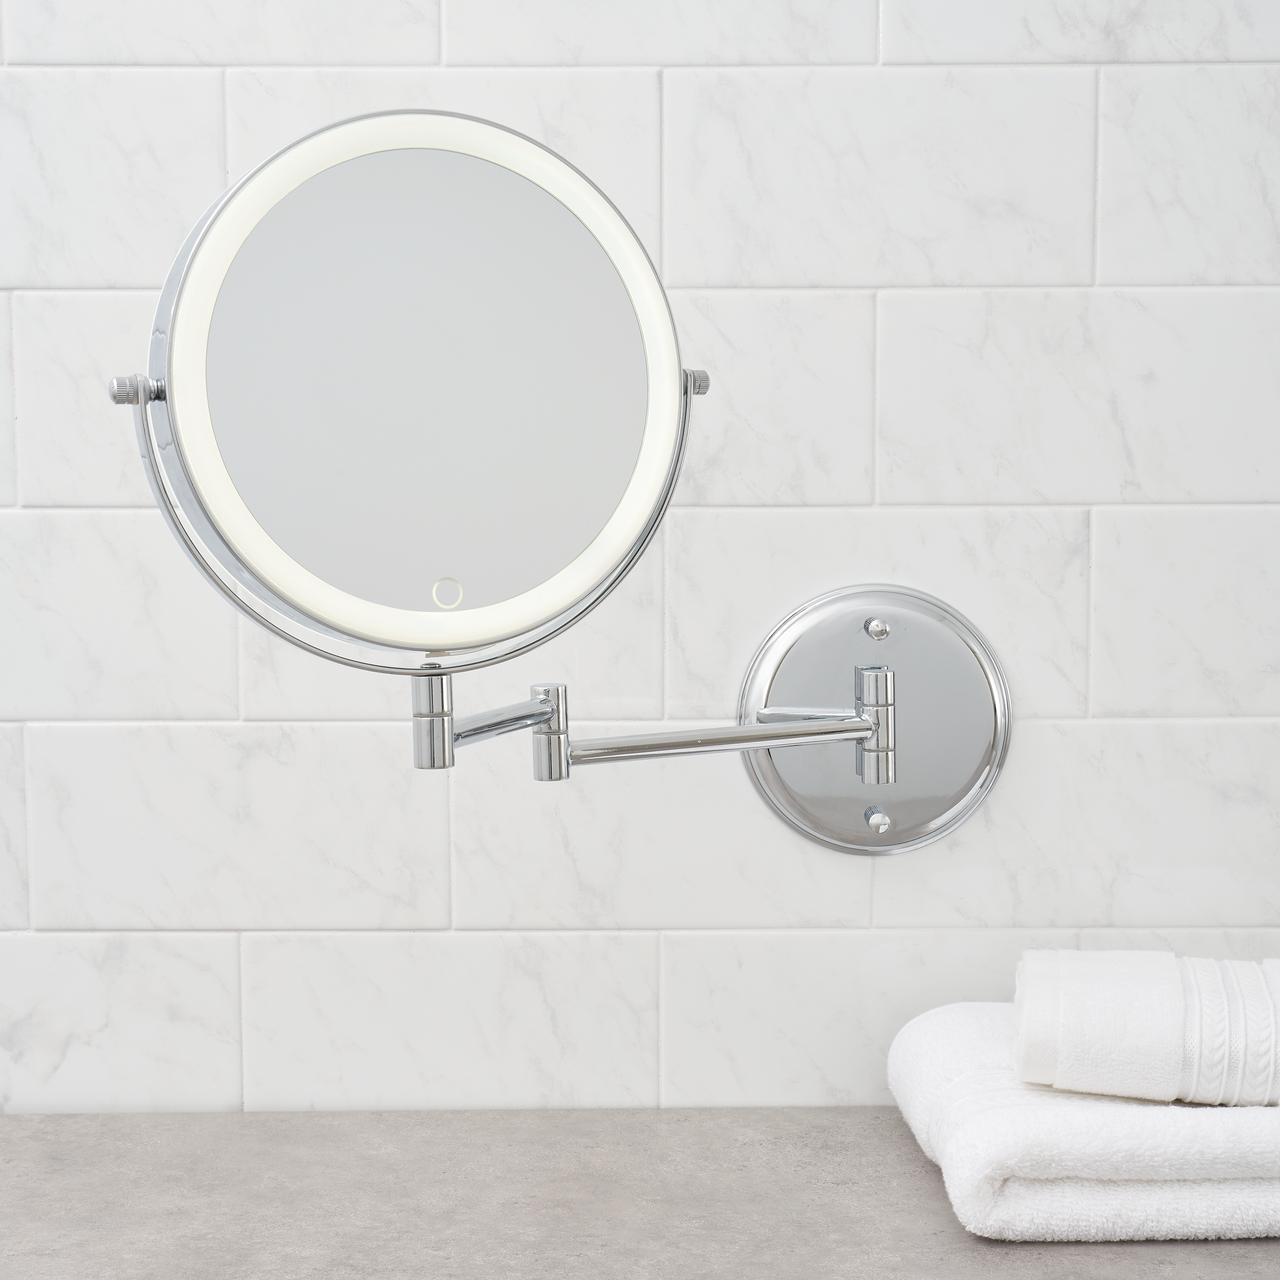 Better Homes & Gardens Modern Round 8 inch Wall Mount LED Mirror - Chrome - image 9 of 11